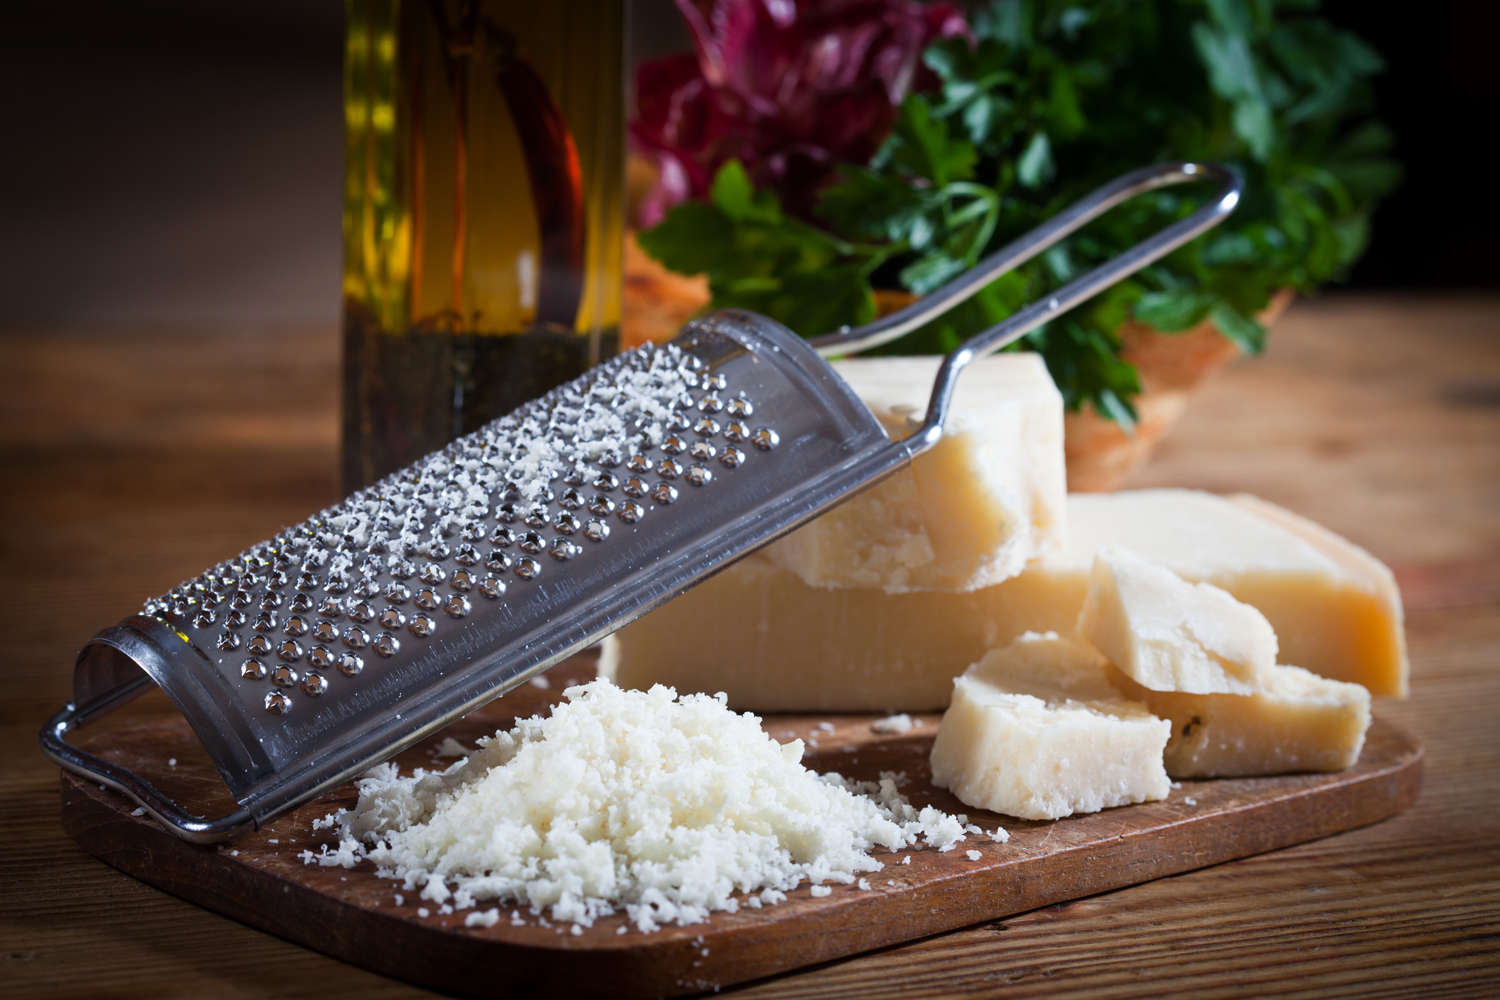 https://www.themanual.com/wp-content/uploads/sites/9/2021/02/best-cheese-graters-2021.jpg?fit=1500%2C1000&p=1